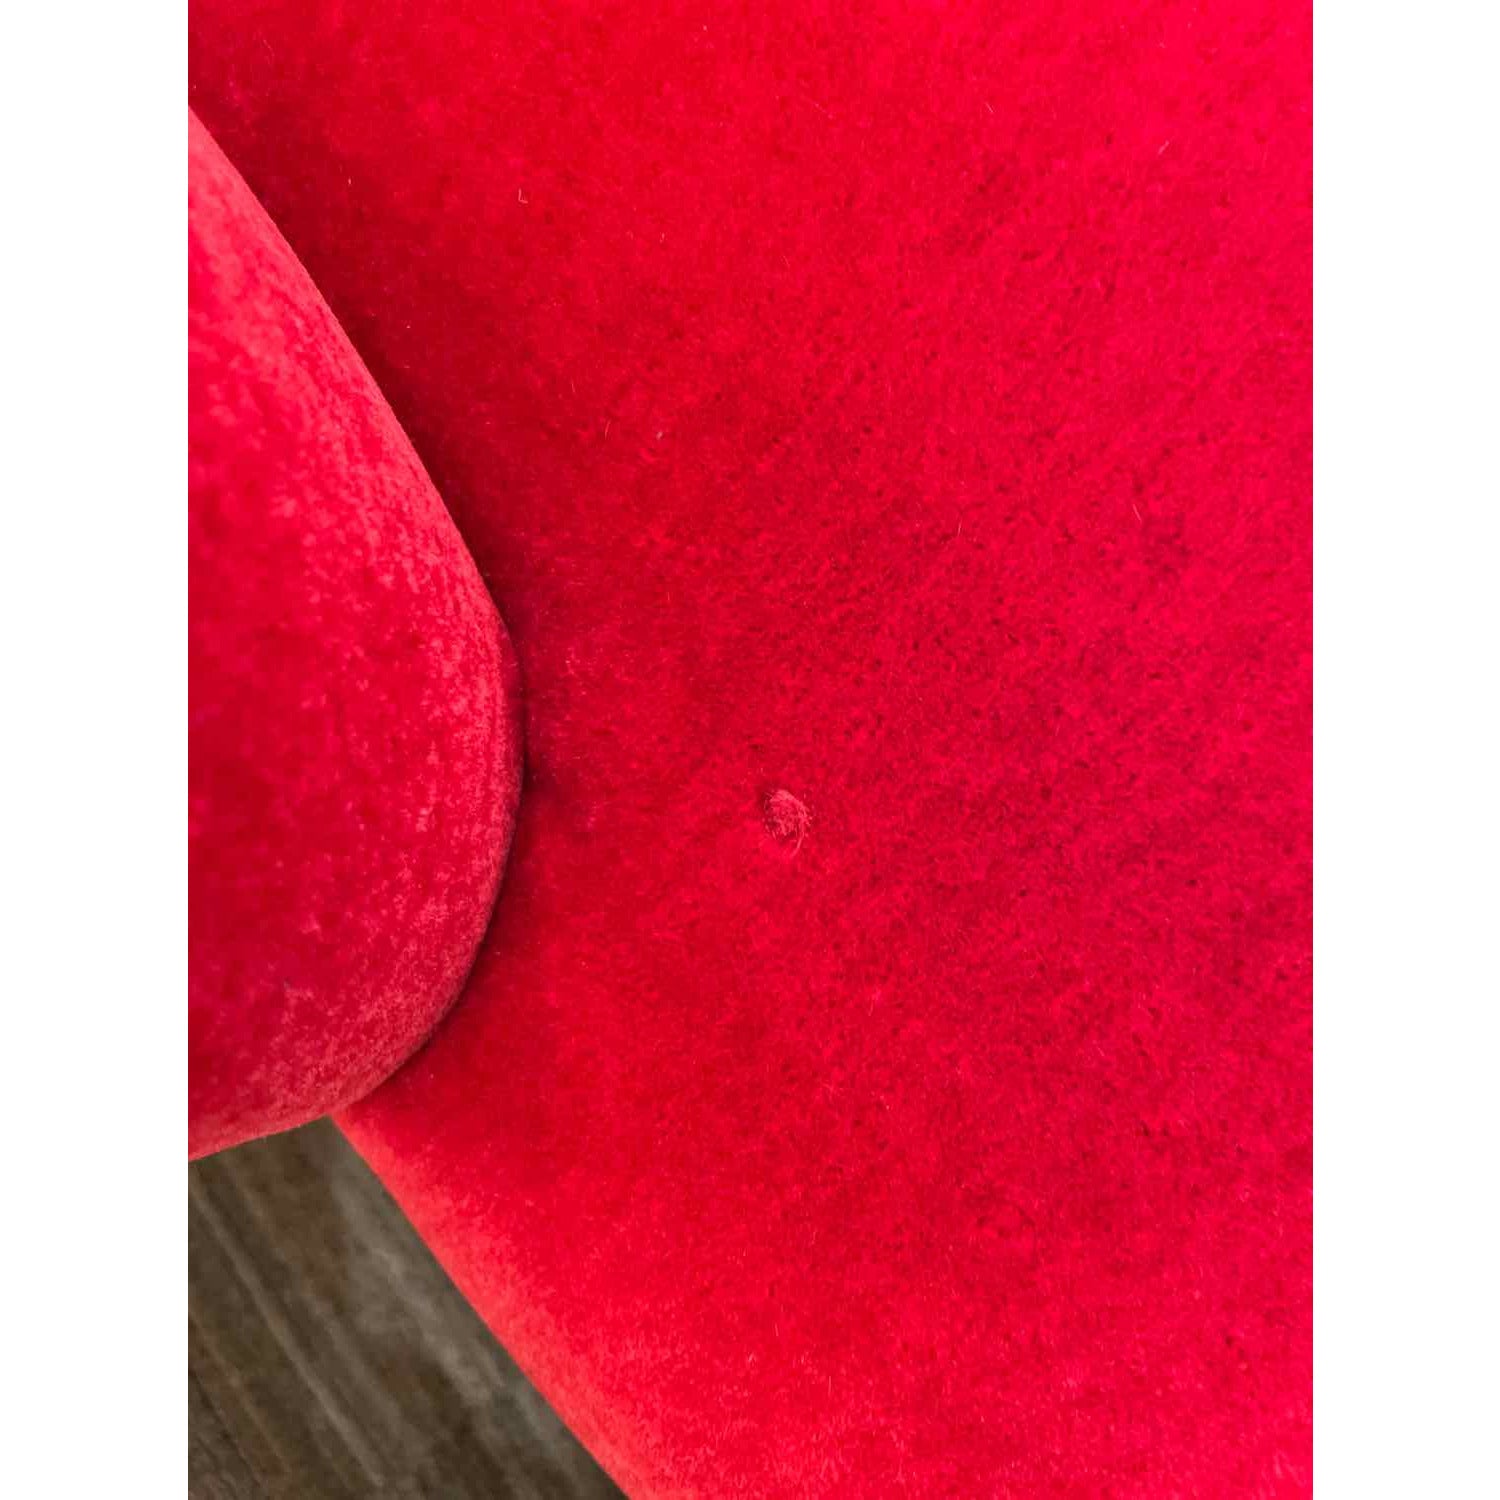 Adesso Red Mohair Itialian side/arm chair - colletteconsignment.com